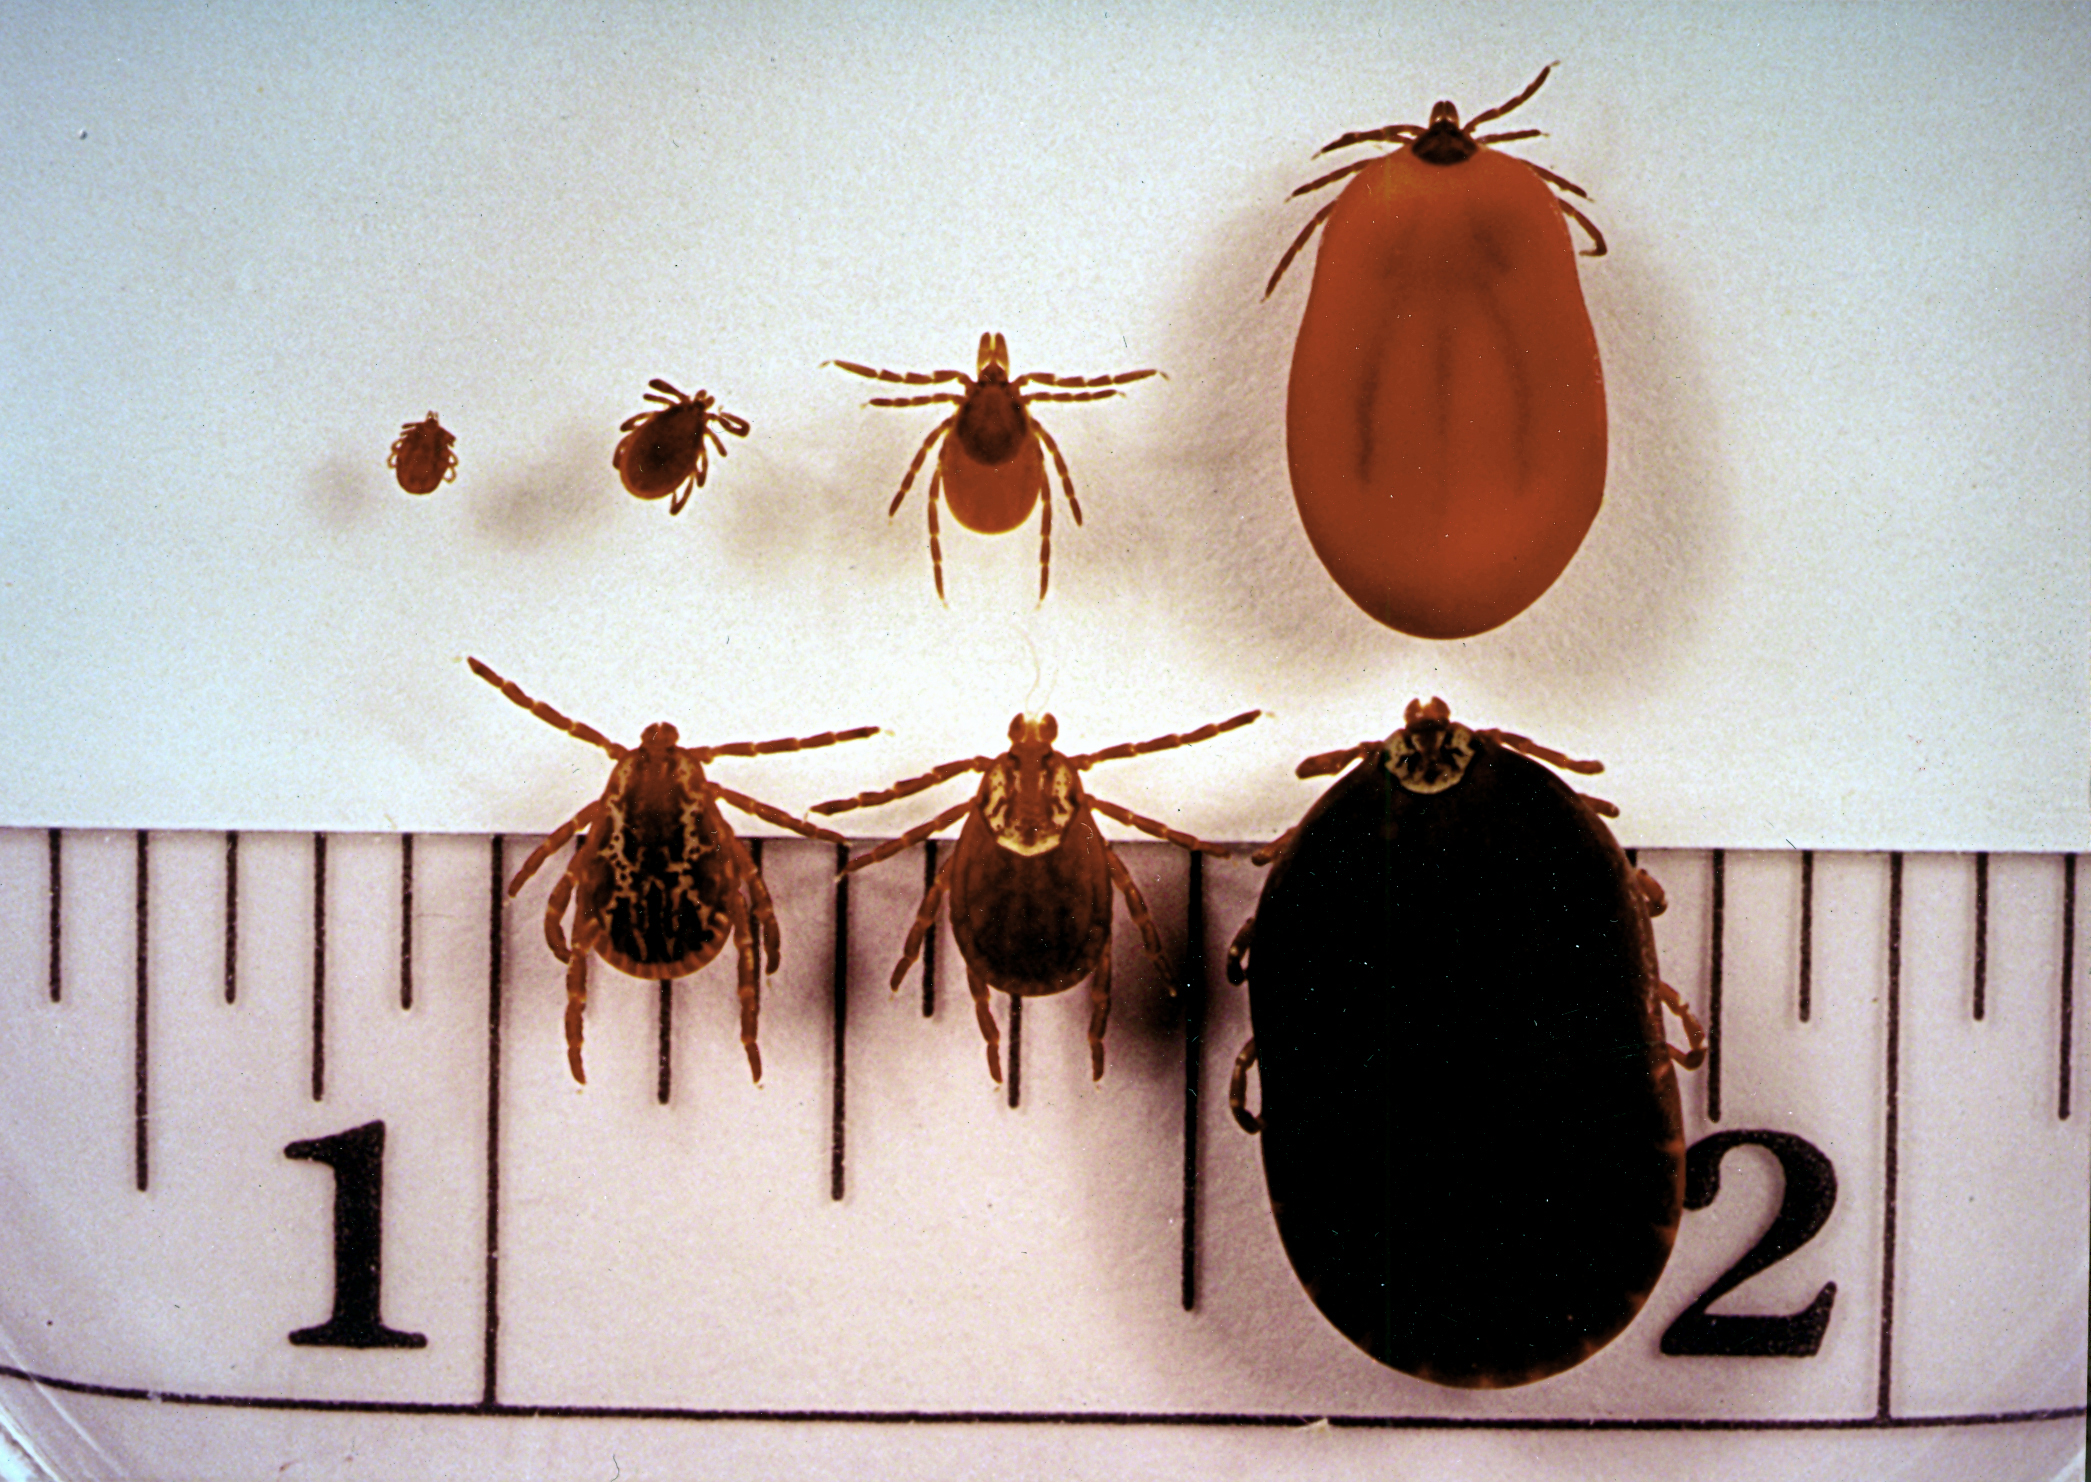 PHOTO: On the top row, the Ixodes dammini, or "deer tick," which transmits lyme disease, is seen. On the bottom row is the dermacentor variabilis, or "American dog tick."